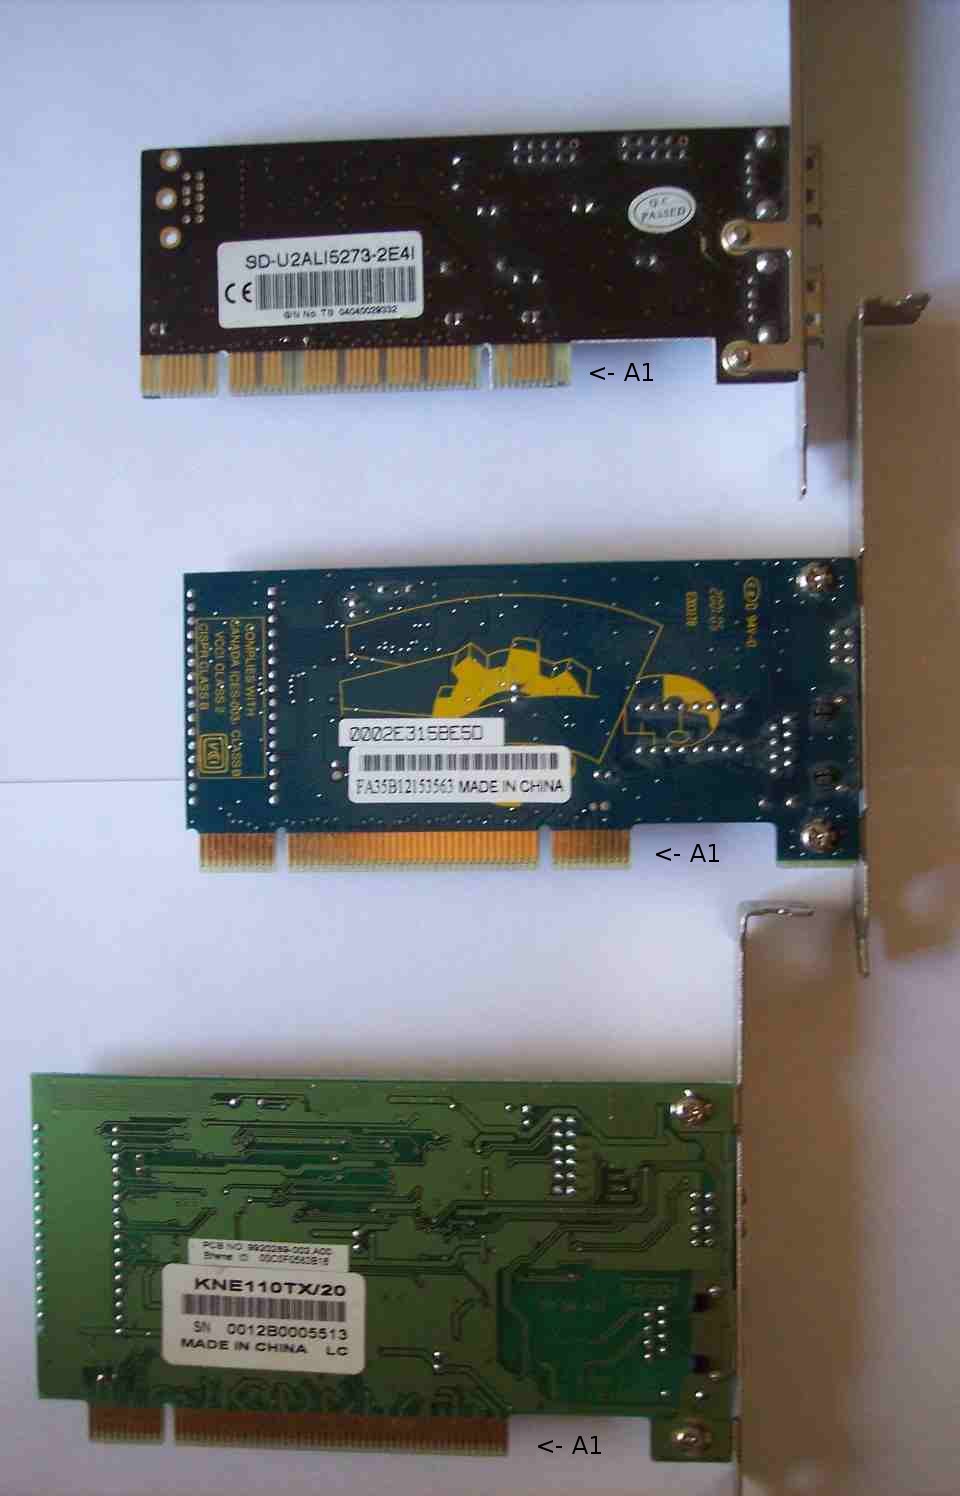 pci cards - side a